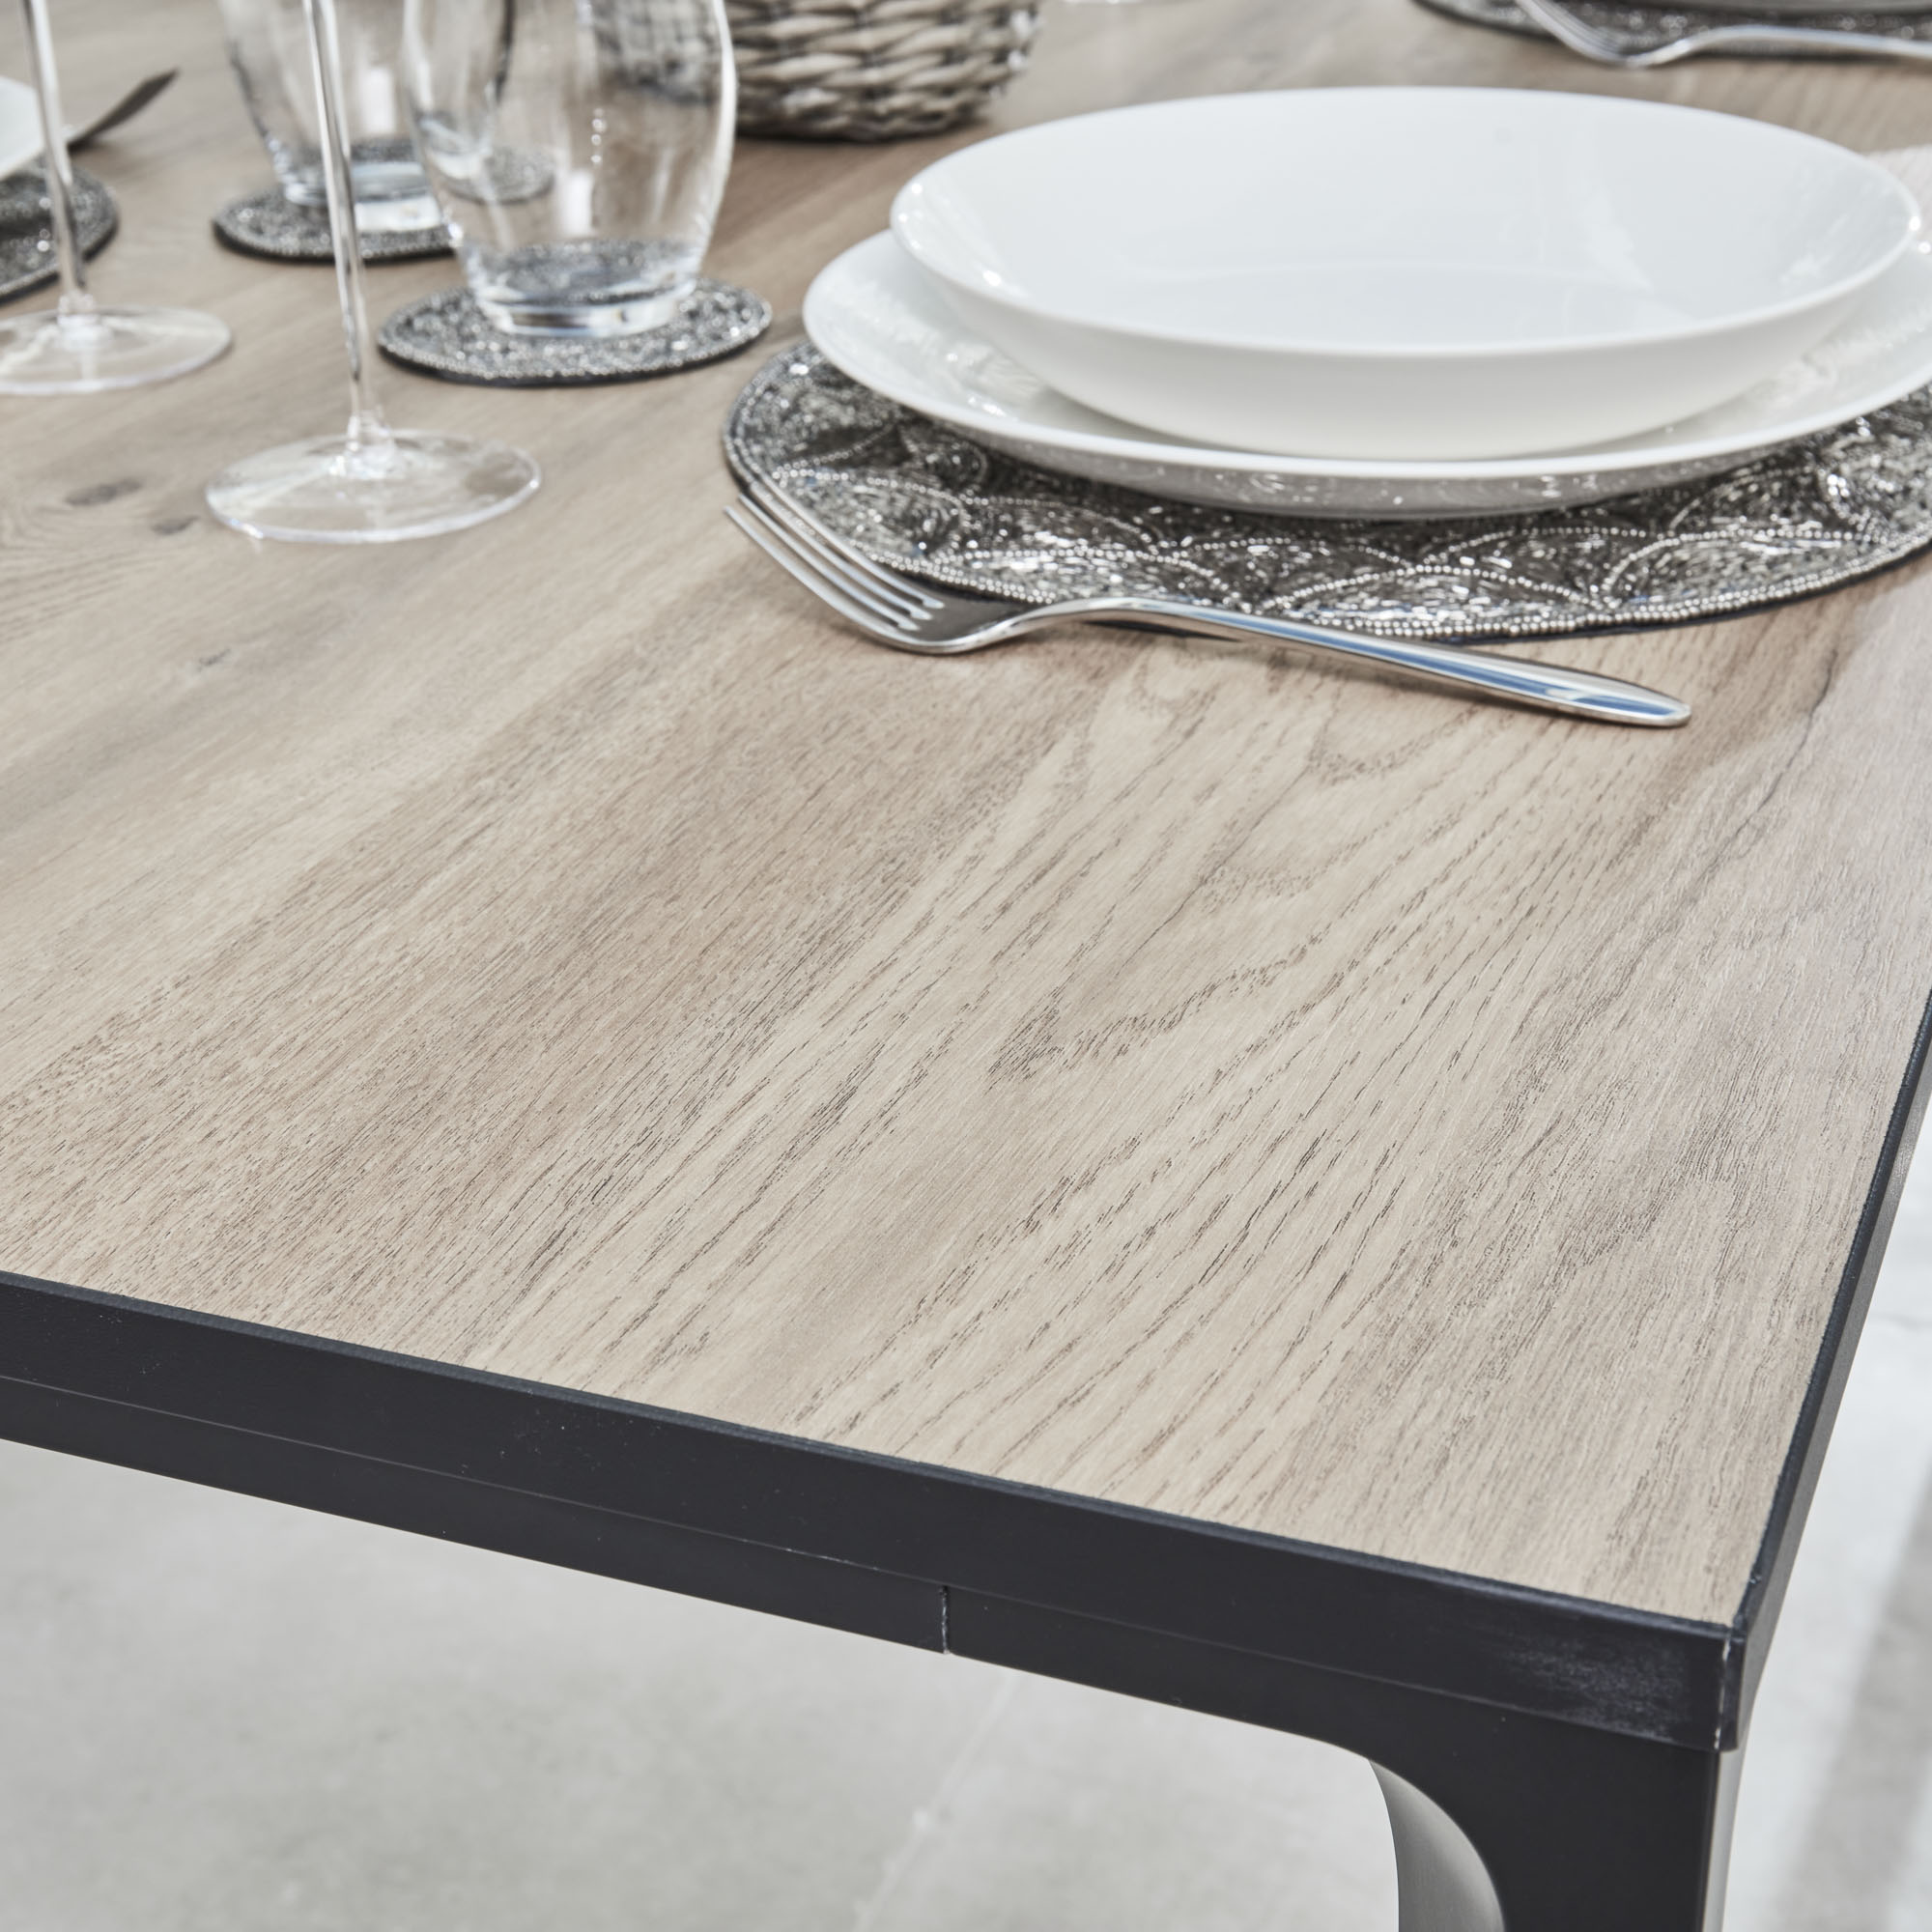 Bellagio 160cm Natural Oak Melamine Dining Table with Black Contemporary Base